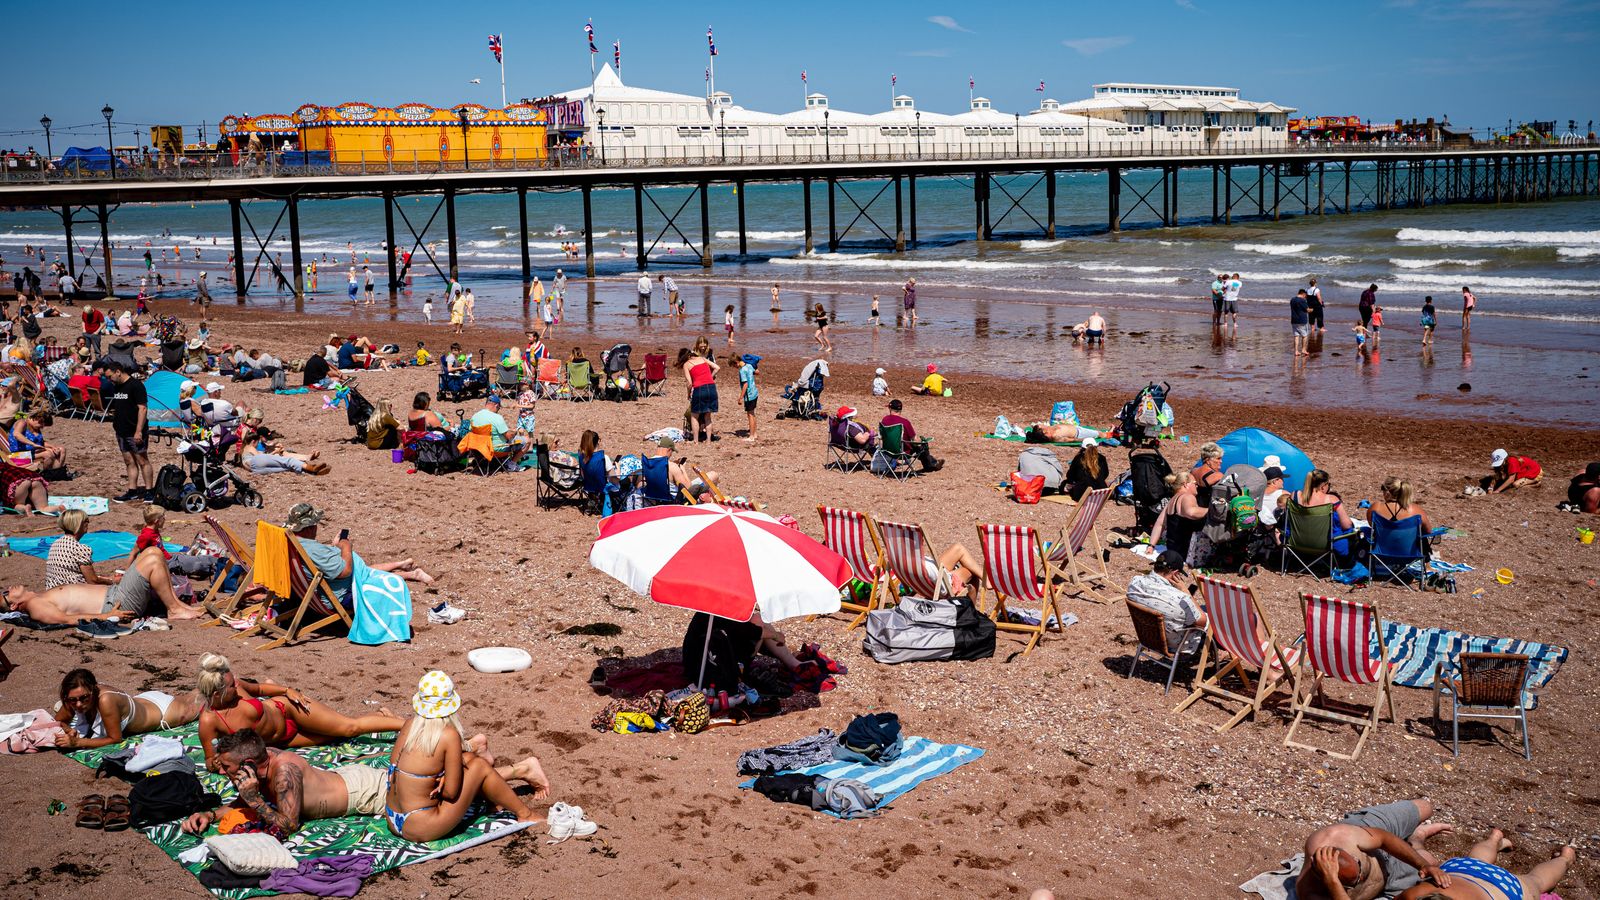 UK set for hottest day of year this week as widespread sunshine predicted